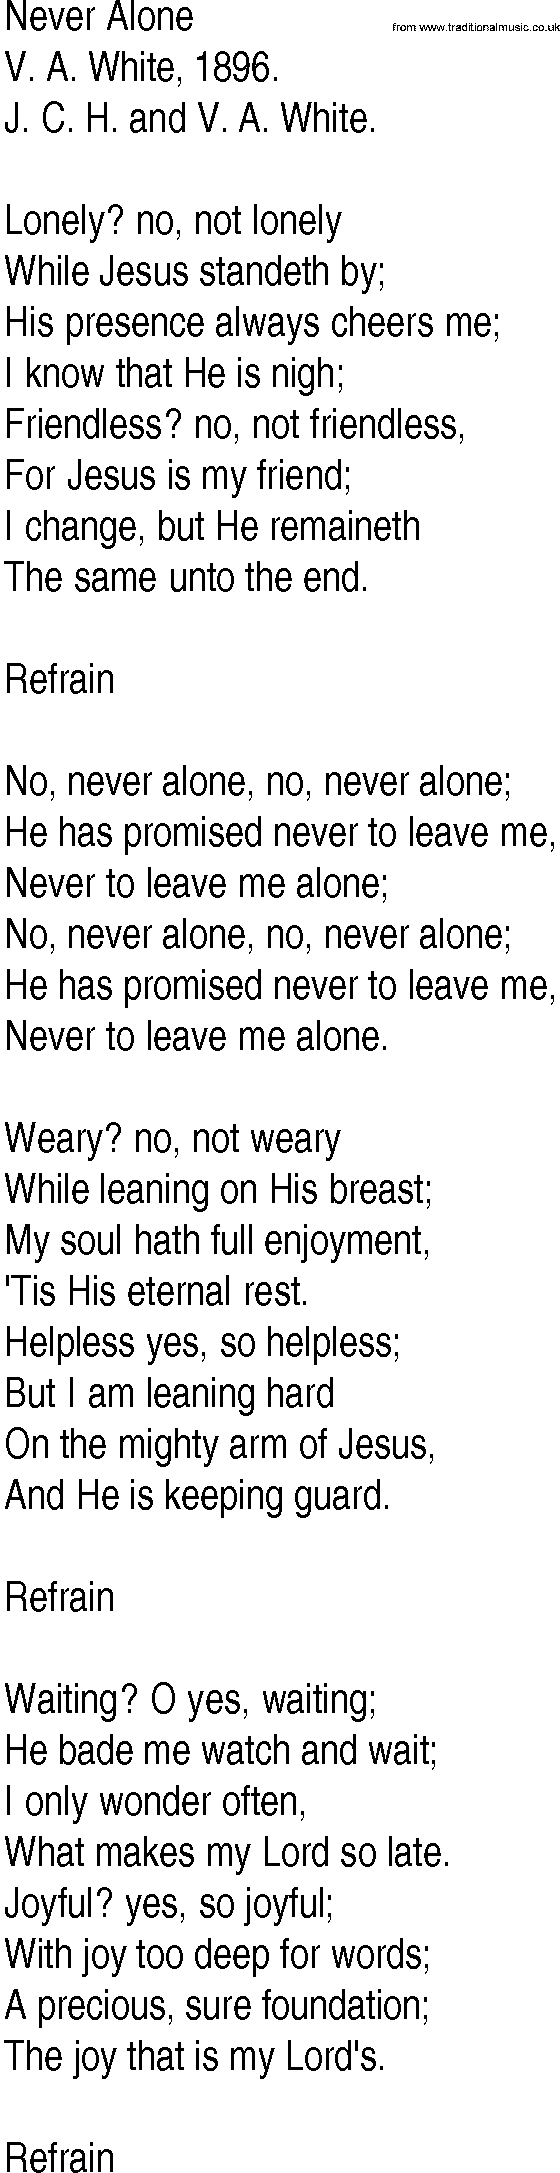 Hymn and Gospel Song: Never Alone by V A White lyrics